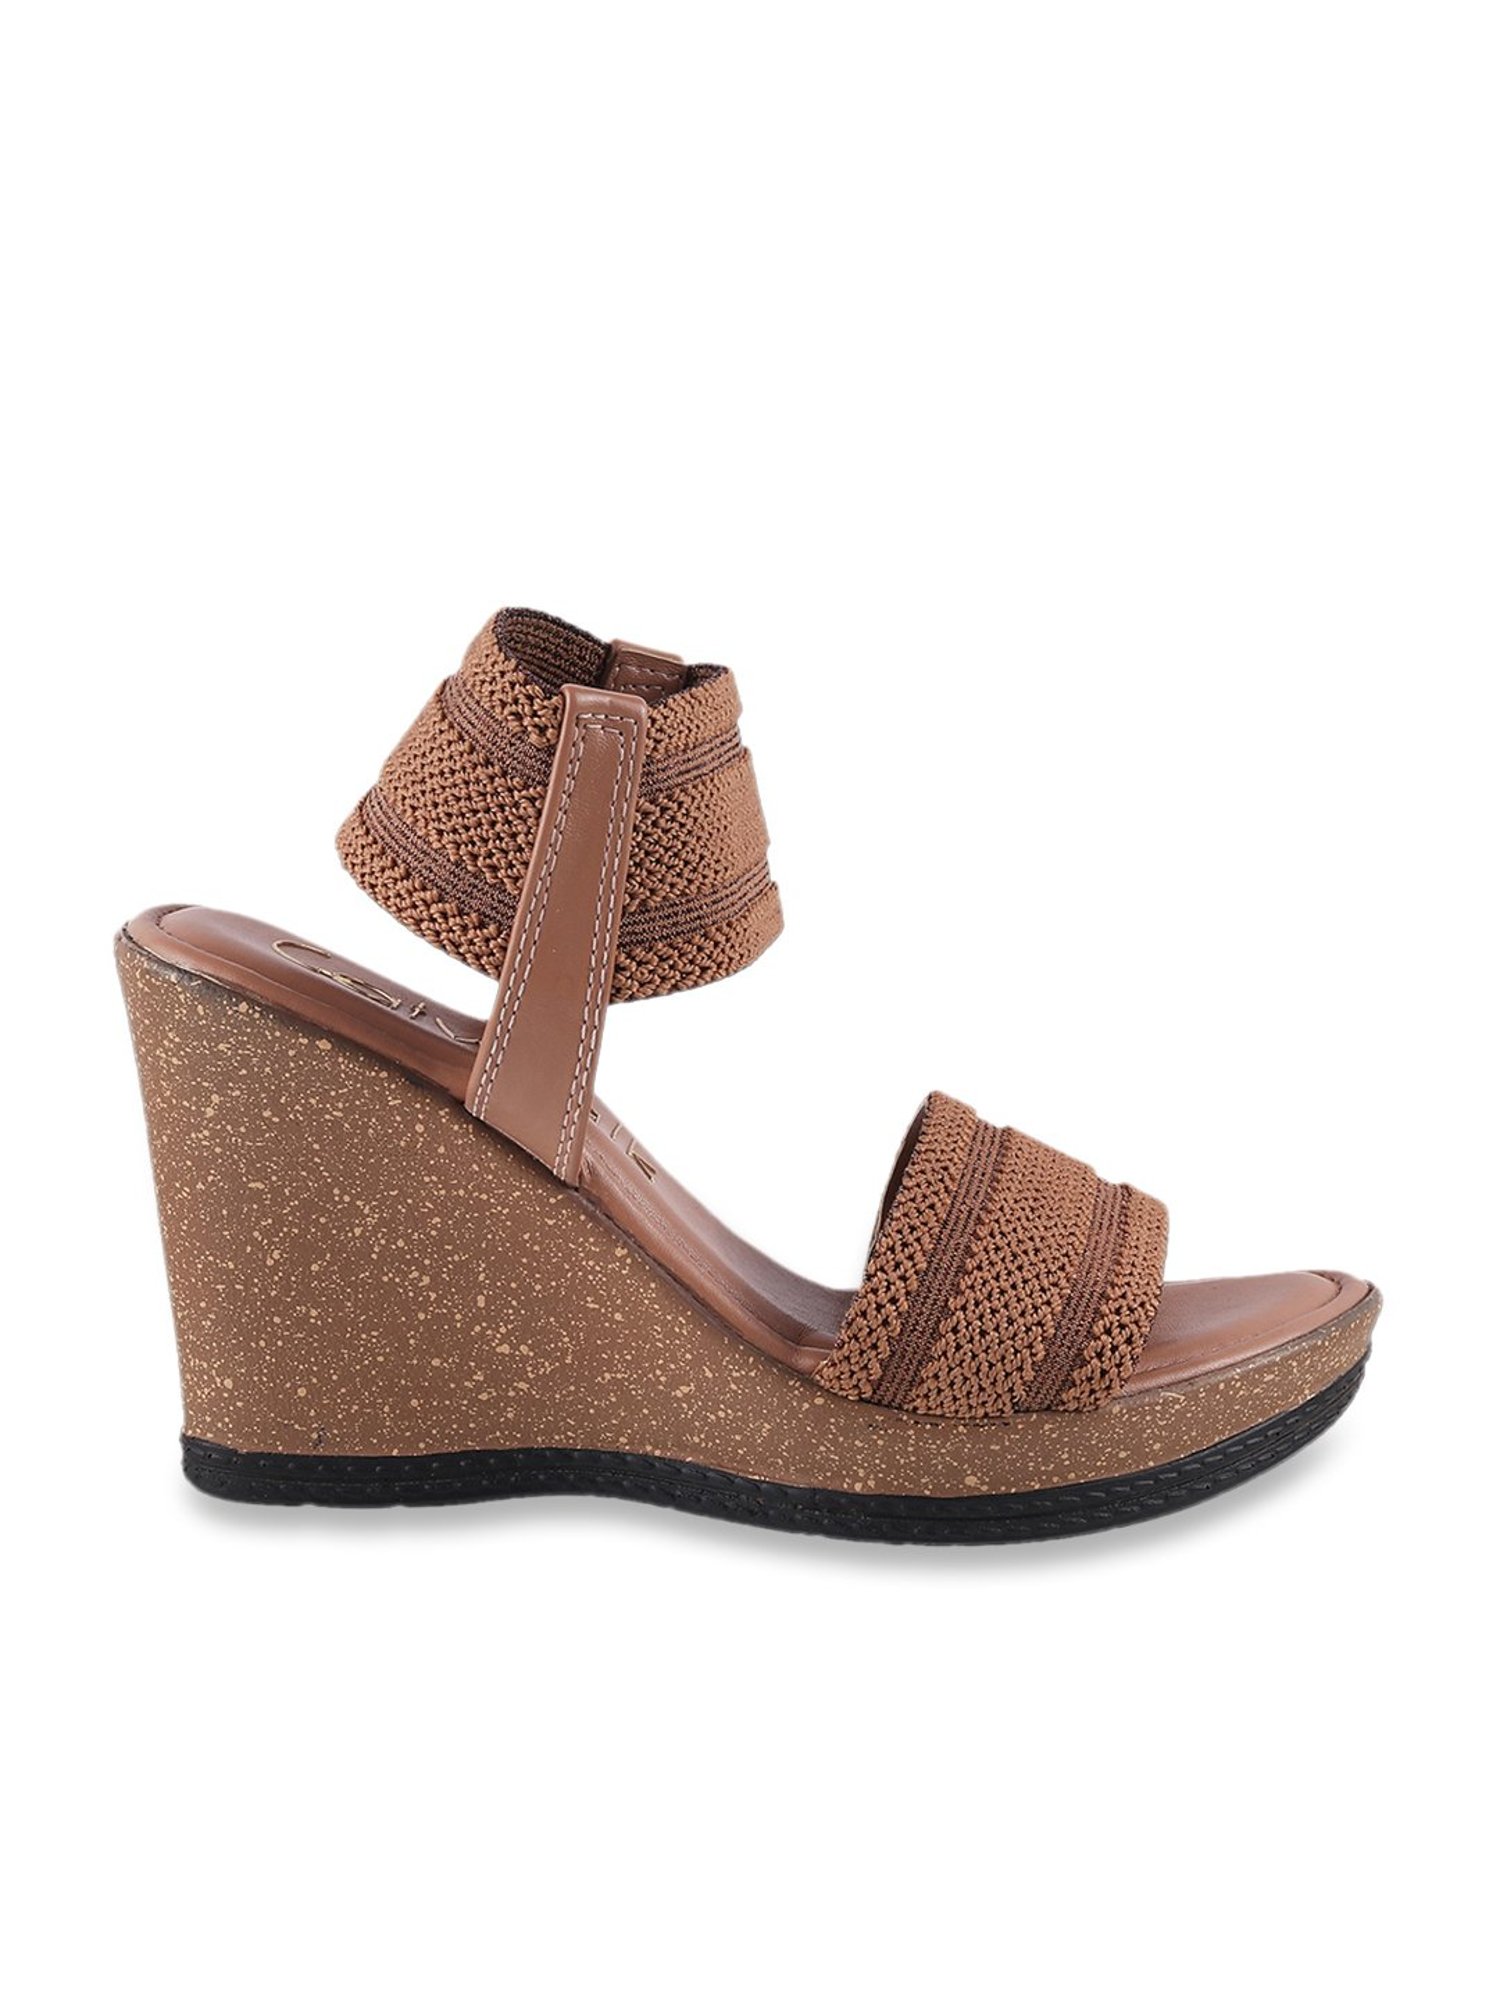 KATE SPADE #42930 Brown Suede Wedge Sandals (US 6.5 EU 36.5) – ALL YOUR  BLISS